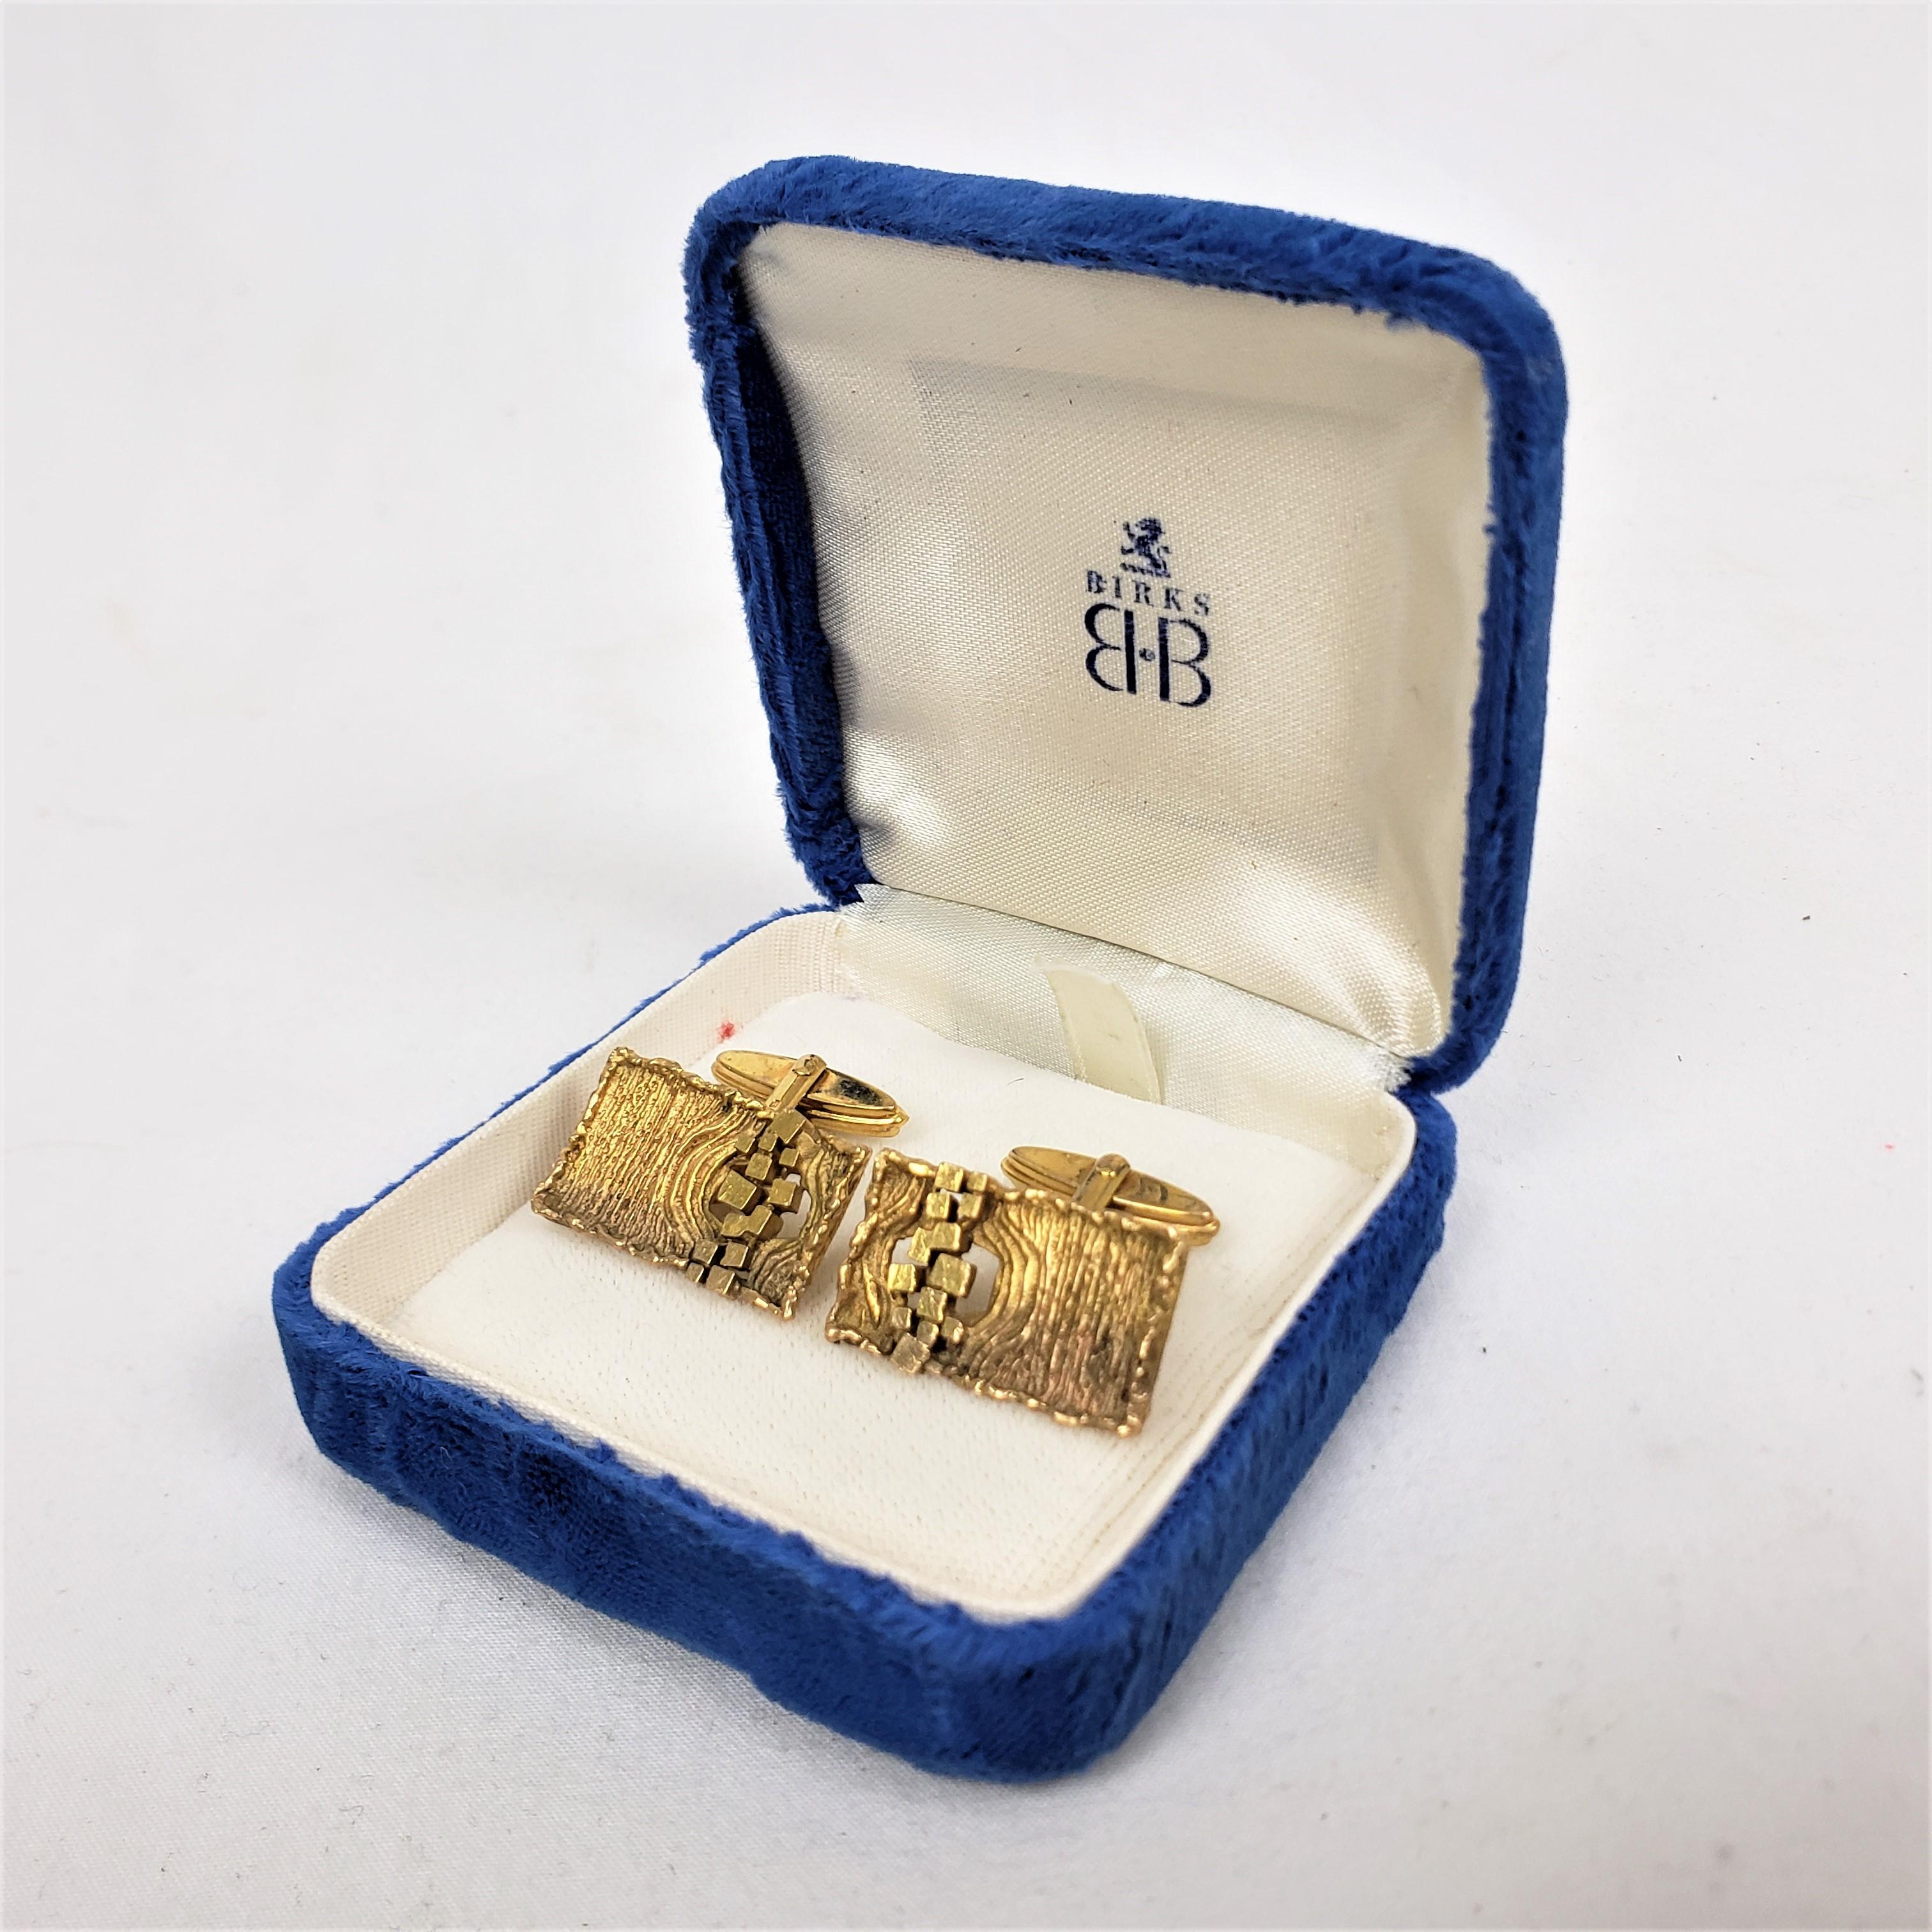 This pair of cufflinks are initialed by an unknown maker, but originated from West Germany and date to approximately 1960 and done in the Brutalist Mid-Century Modern style. The cufflinks are composed of 1`8 karat yellow gold with a panelled front